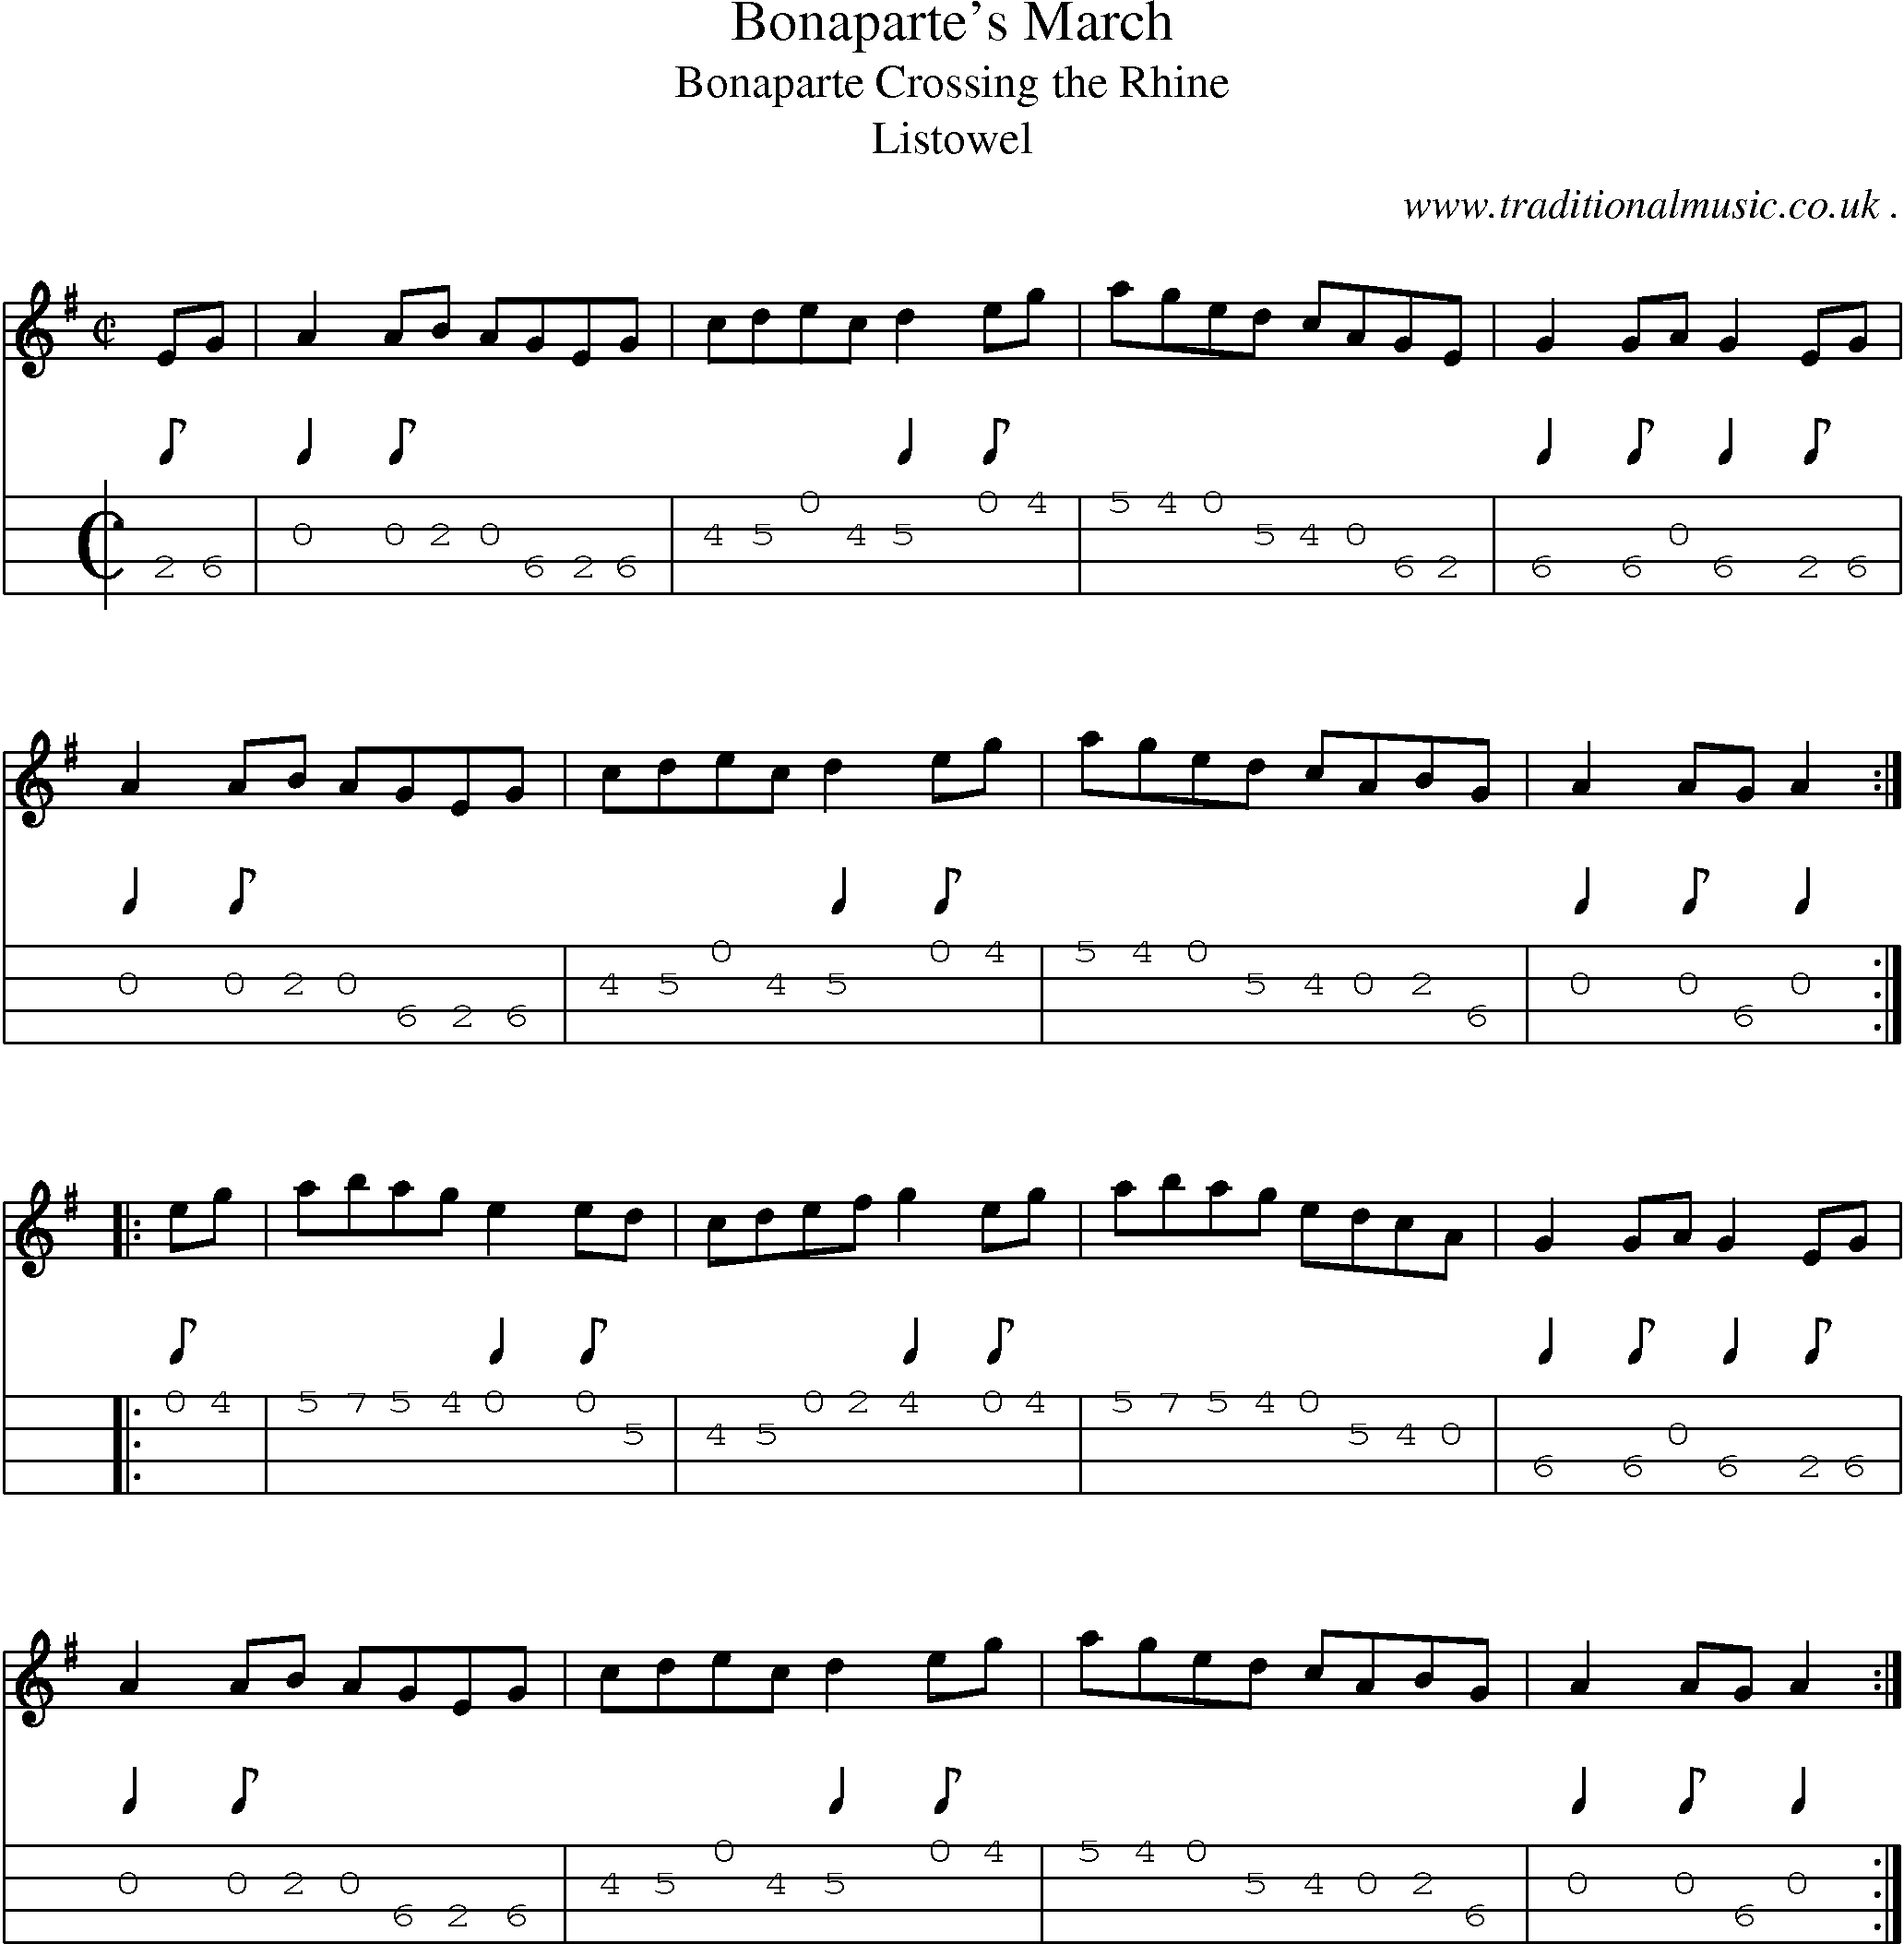 Sheet-Music and Mandolin Tabs for Bonapartes March